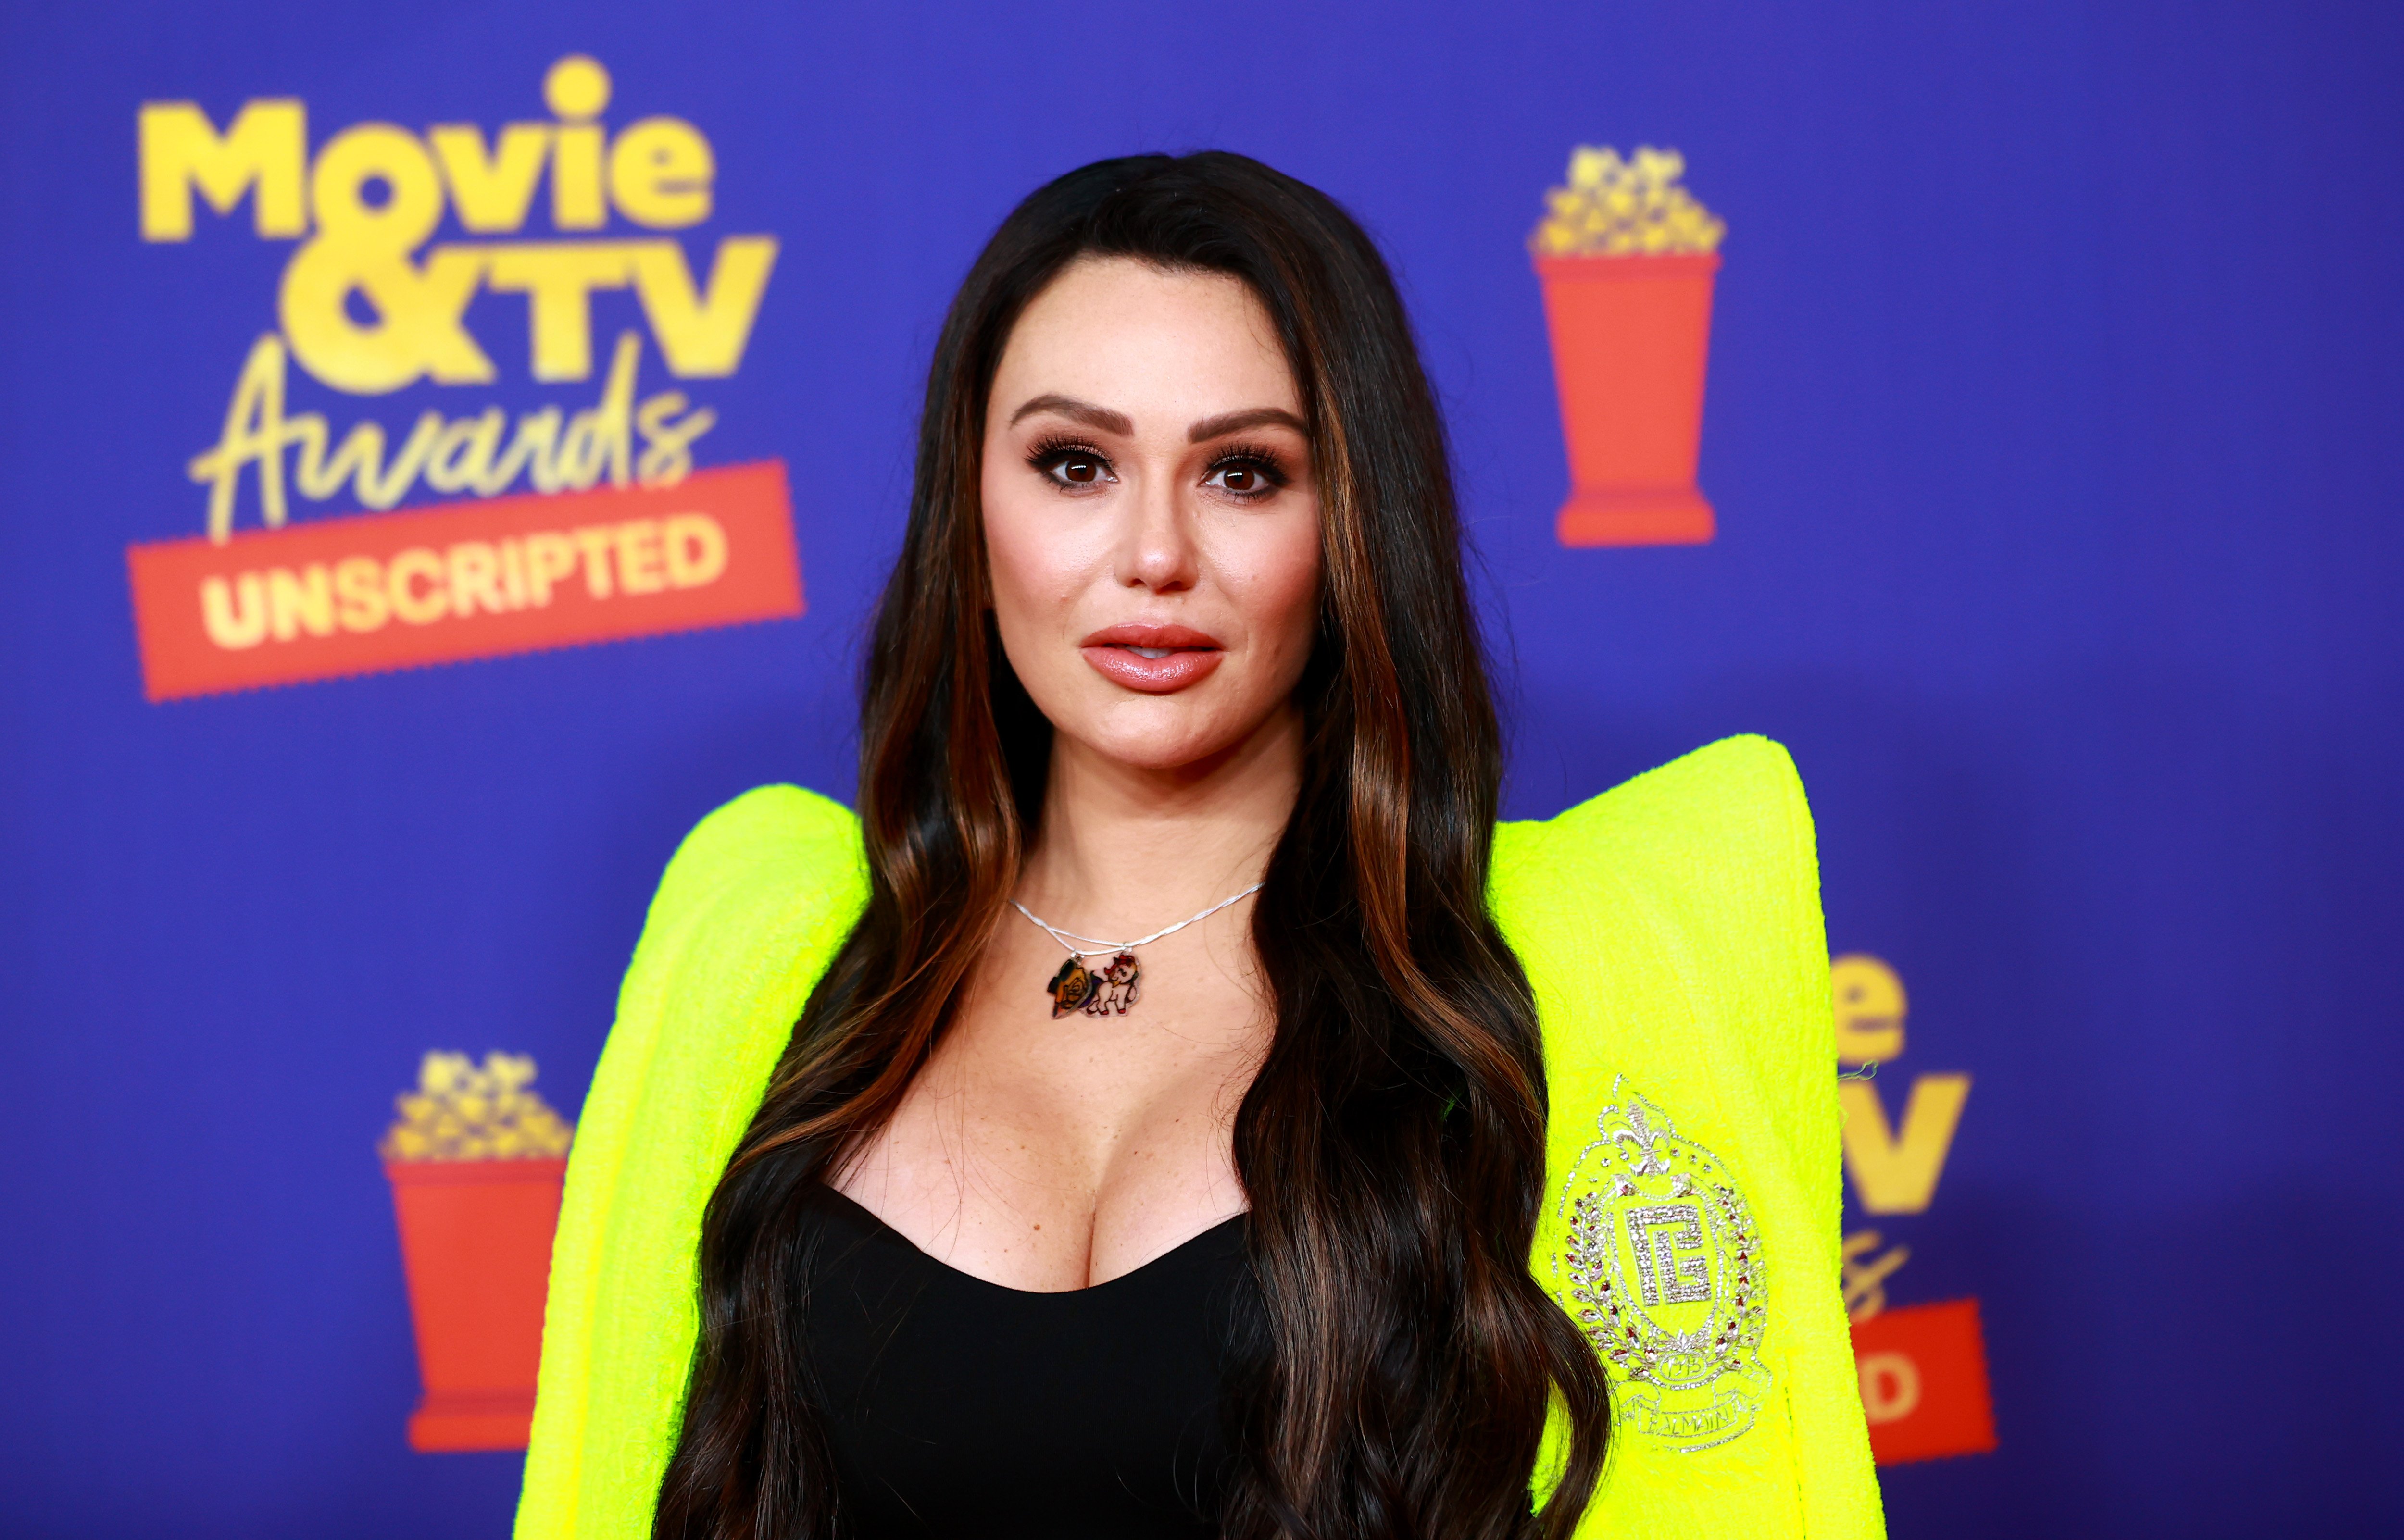 Jenni 'JWoww' Farley from 'Jersey Shore: Family Vacation' on the red carpet; she watches 'The Office' occasionally